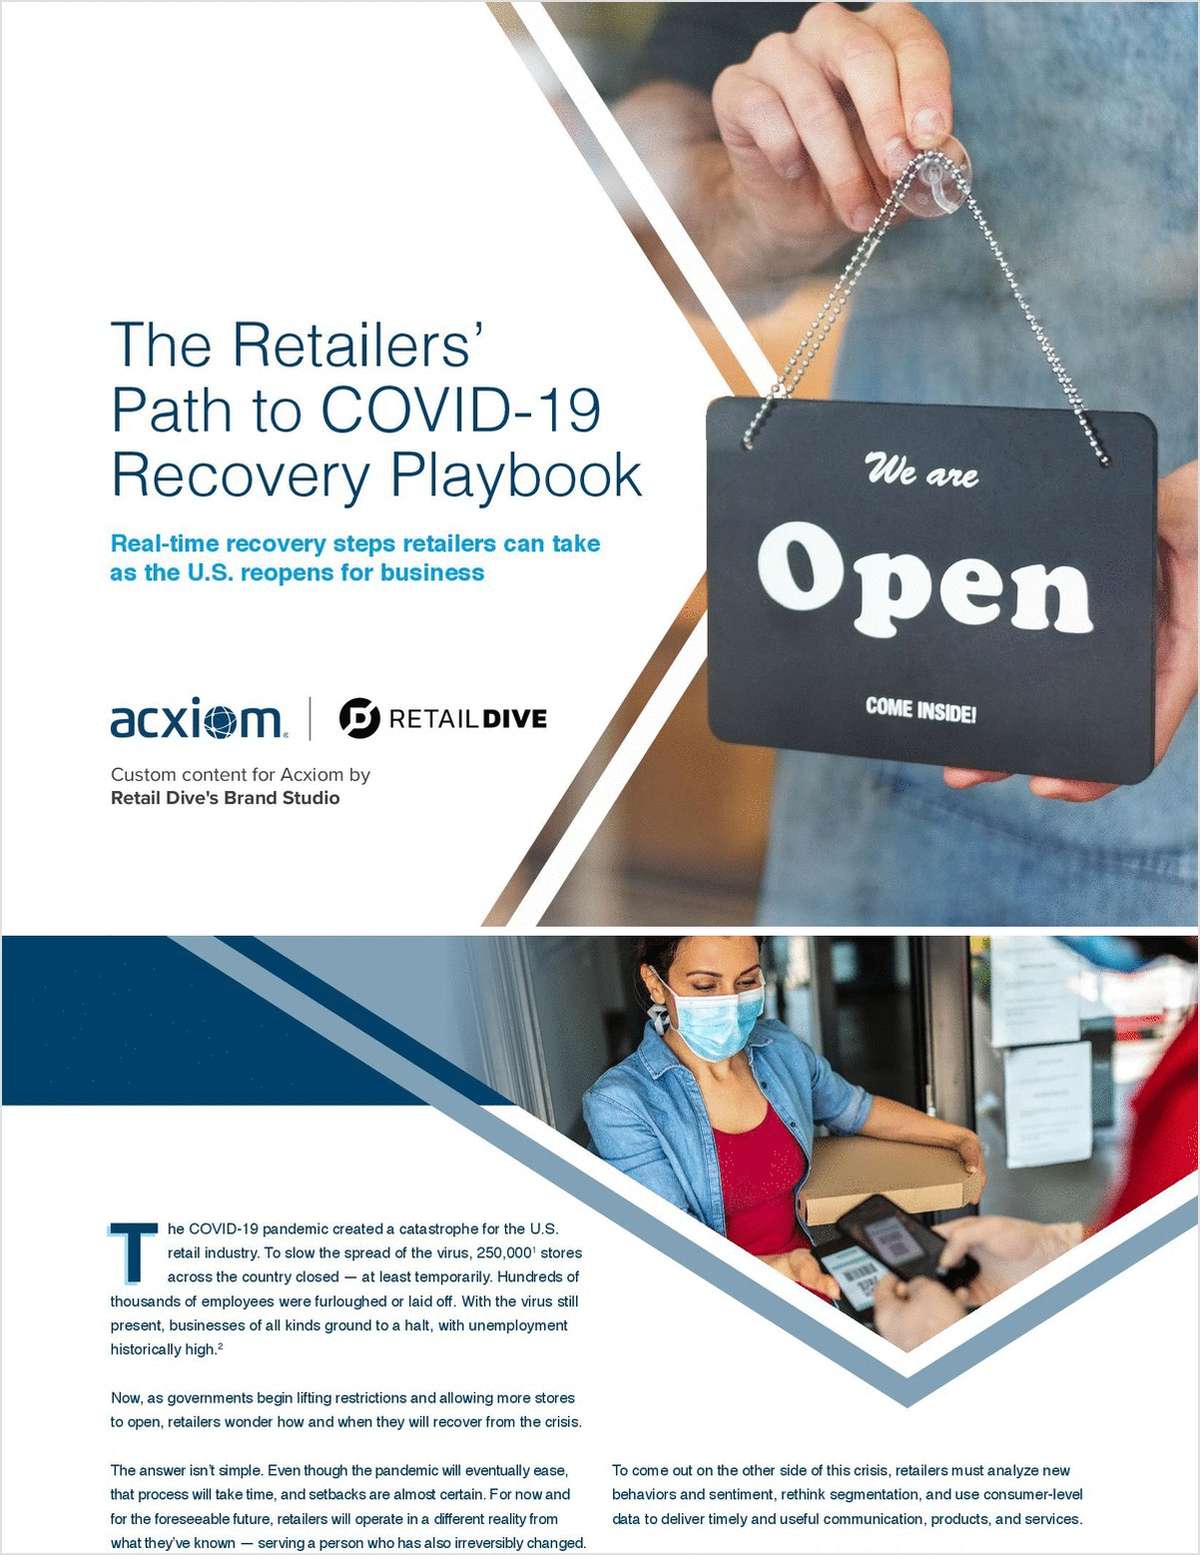 The Retailers' Path to COVID-19 Recovery Playbook